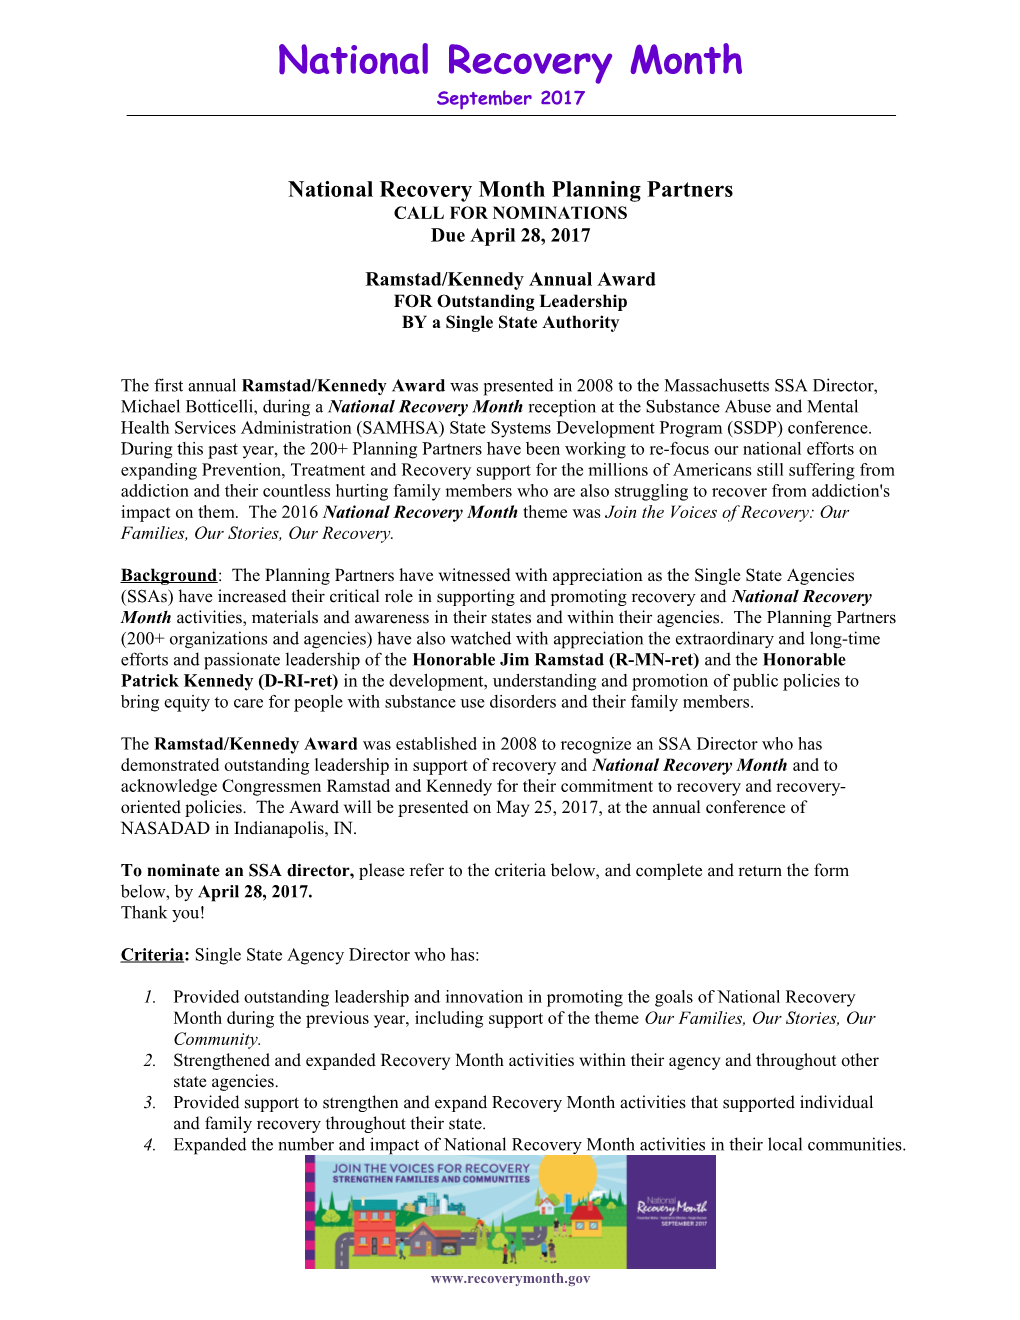 National Recovery Month Planning Partners